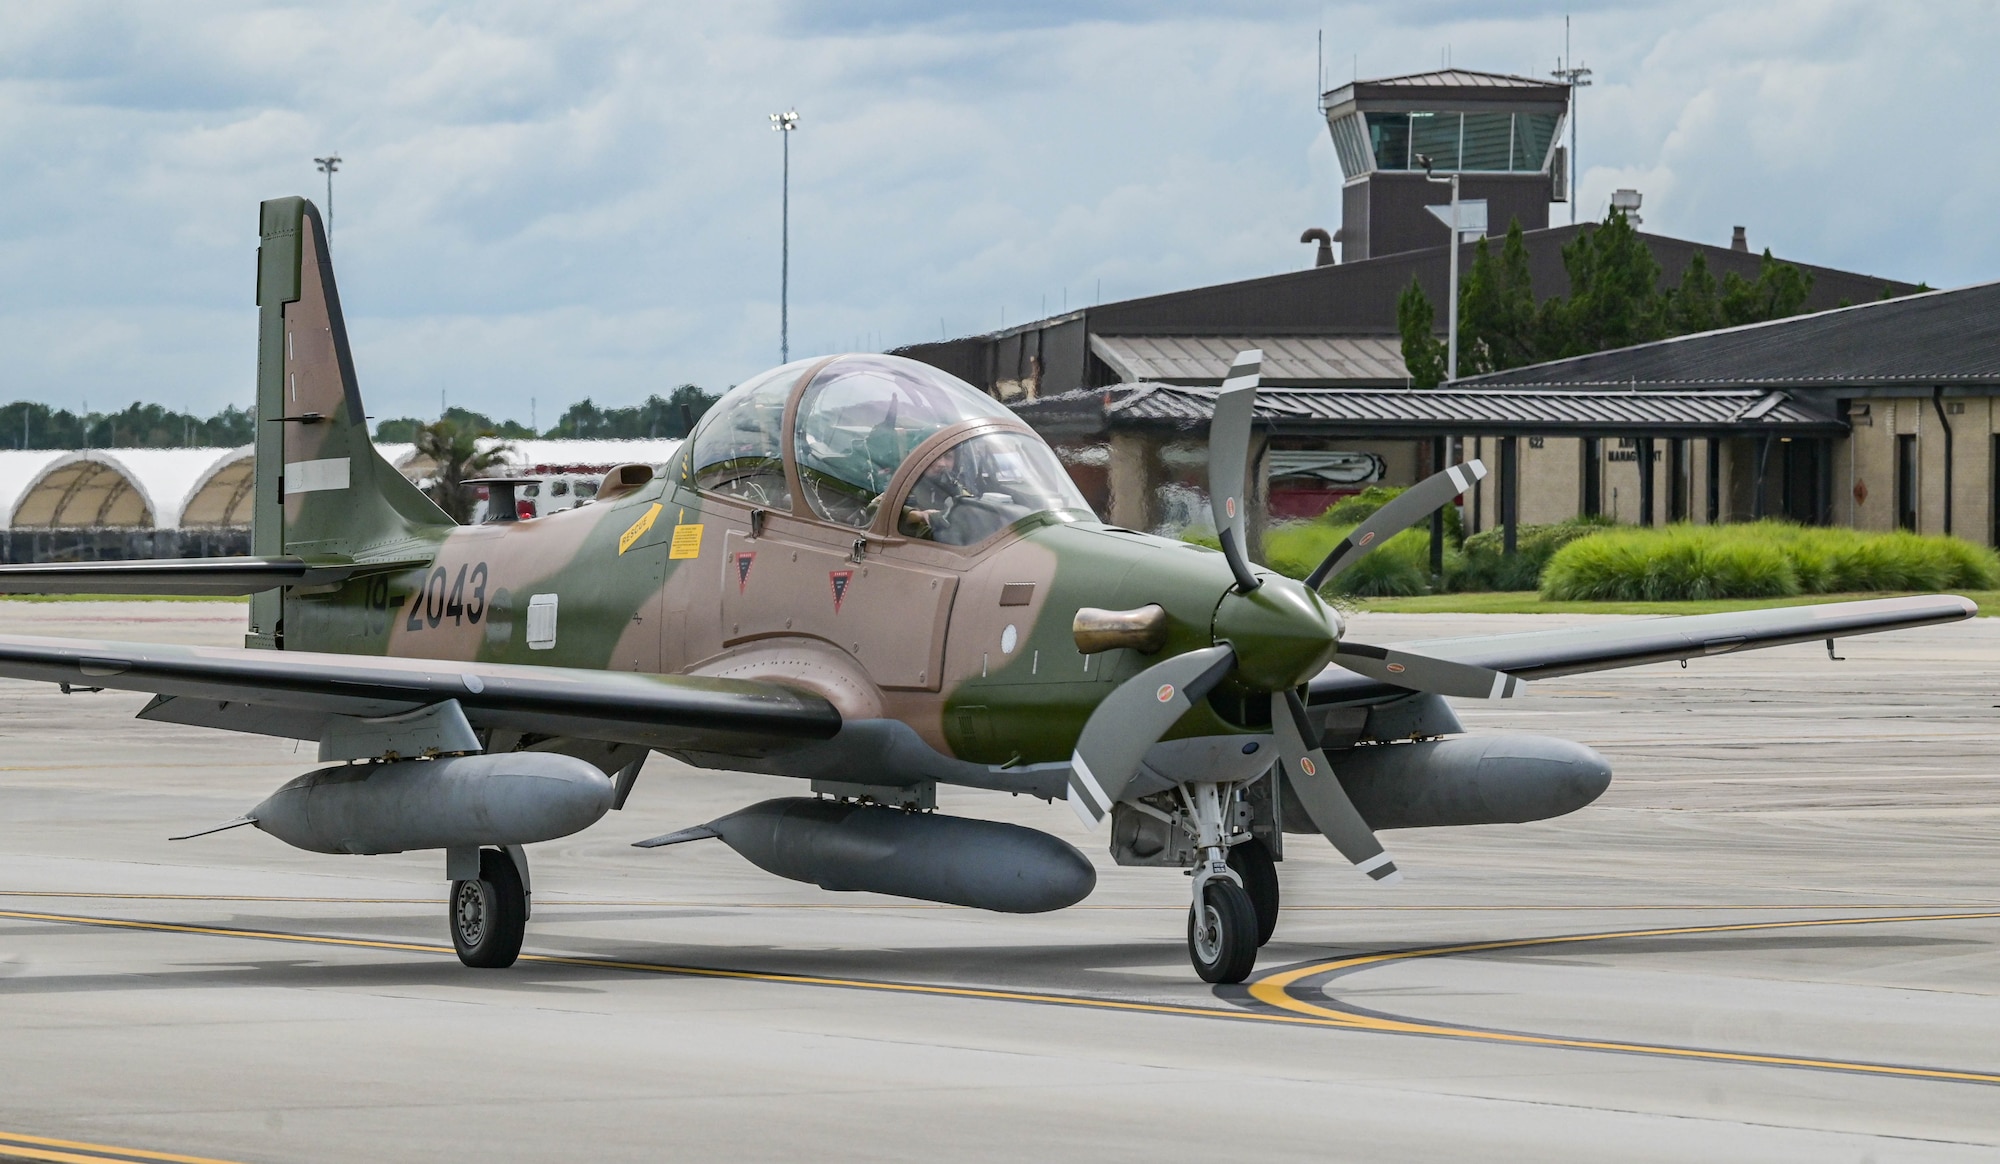 An A-29 Super Tucano aircraft pilot taxis down the runway to depart Moody Air Force Base, Georgia, Sept. 15, 2021. The U.S. government sold 12 A-29 aircraft to the Nigerian Air Force to enhance their capabilities in providing national security for Nigeria. (U.S. Air Force photo by Senior Airman Rebeckah Medeiros)